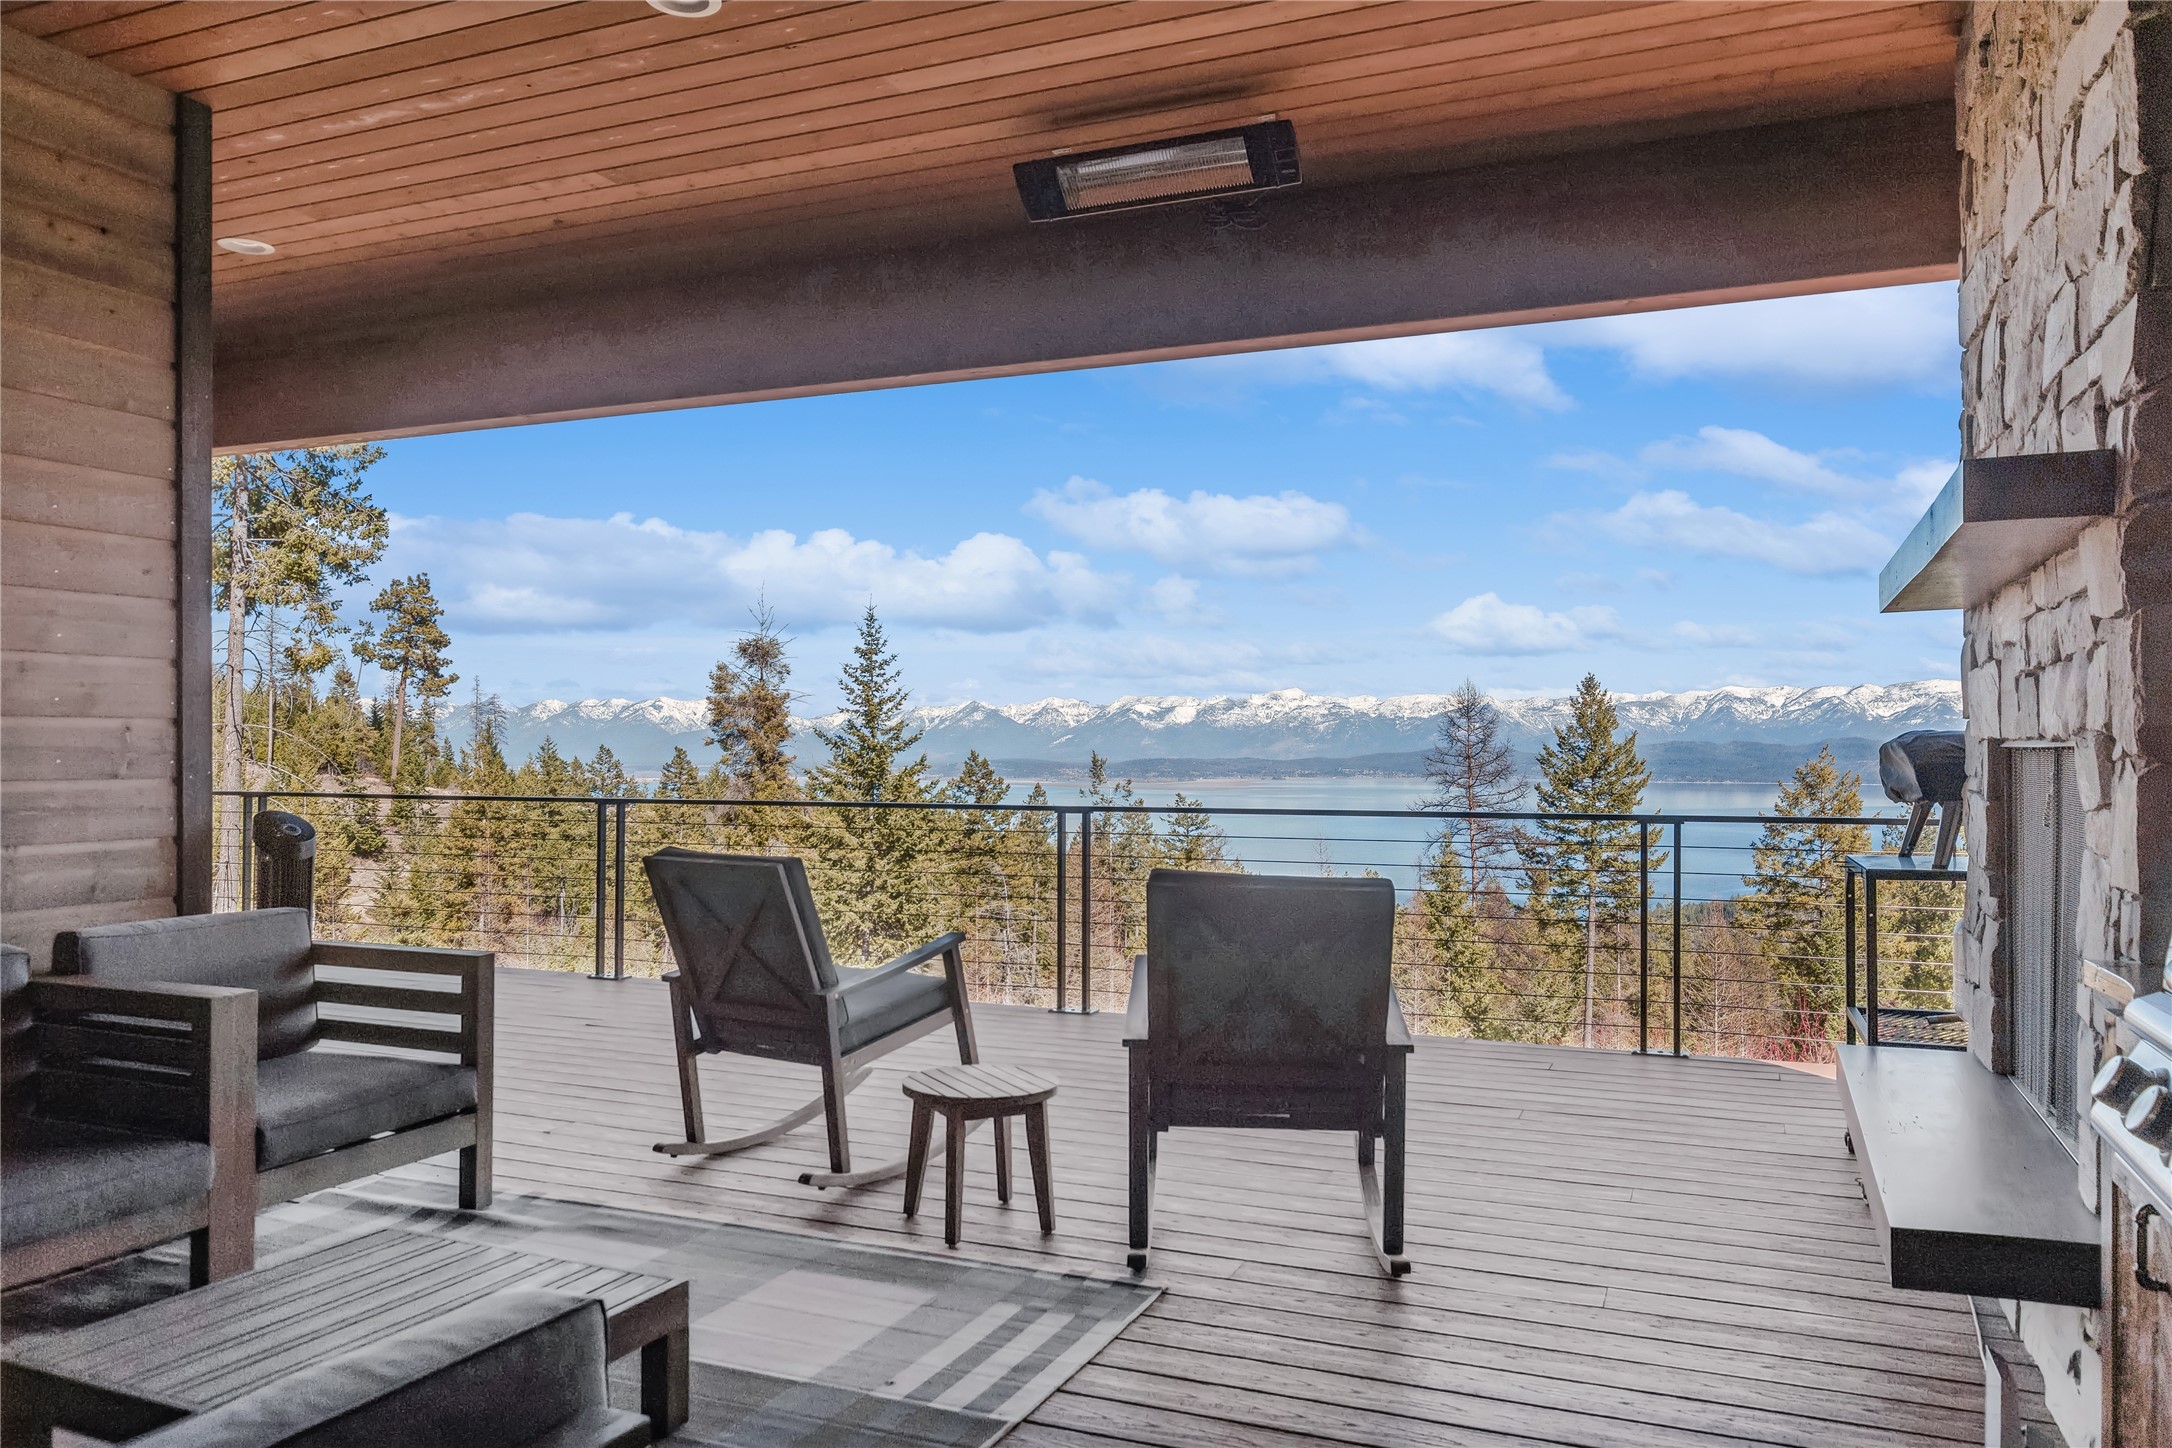 You will be impressed by the stunning lake and mountain views from this impeccable Lakeside residence. Built in 2020, this 4152 square foot home features a primary suite with walk-in closet,  a guest suite and office  on the main level, with 2 additional bedrooms, living area, full bath, and game room on the lower level.  The efficient kitchen features  quartz countertops, modern fixtures, soft close drawers, and plenty of storage.  The living room has open flow with engineered hardwood flooring , stone fireplace, and adjacent dining area. One of the features that sets this home apart from the rest is the living room/dining room wall of windows that folds all the way open for expanded indoor/outdoor living and entertaining in the spring, summer, and fall.  Enjoy unobstructed views of the mountains and Flathead Lake while sipping a cup of coffee, celebrating with a neighborhood cookout, or relaxing with a glass of wine at sunset on the deck. The attached 3-car garage keeps your cars protected and safe. The view of the mountains and lake are among the many highlights of this property. This home is designed to flow seamlessly between all living areas. There is plenty of space indoors and out to enjoy the views, take in nature, and admire the starlit sky.